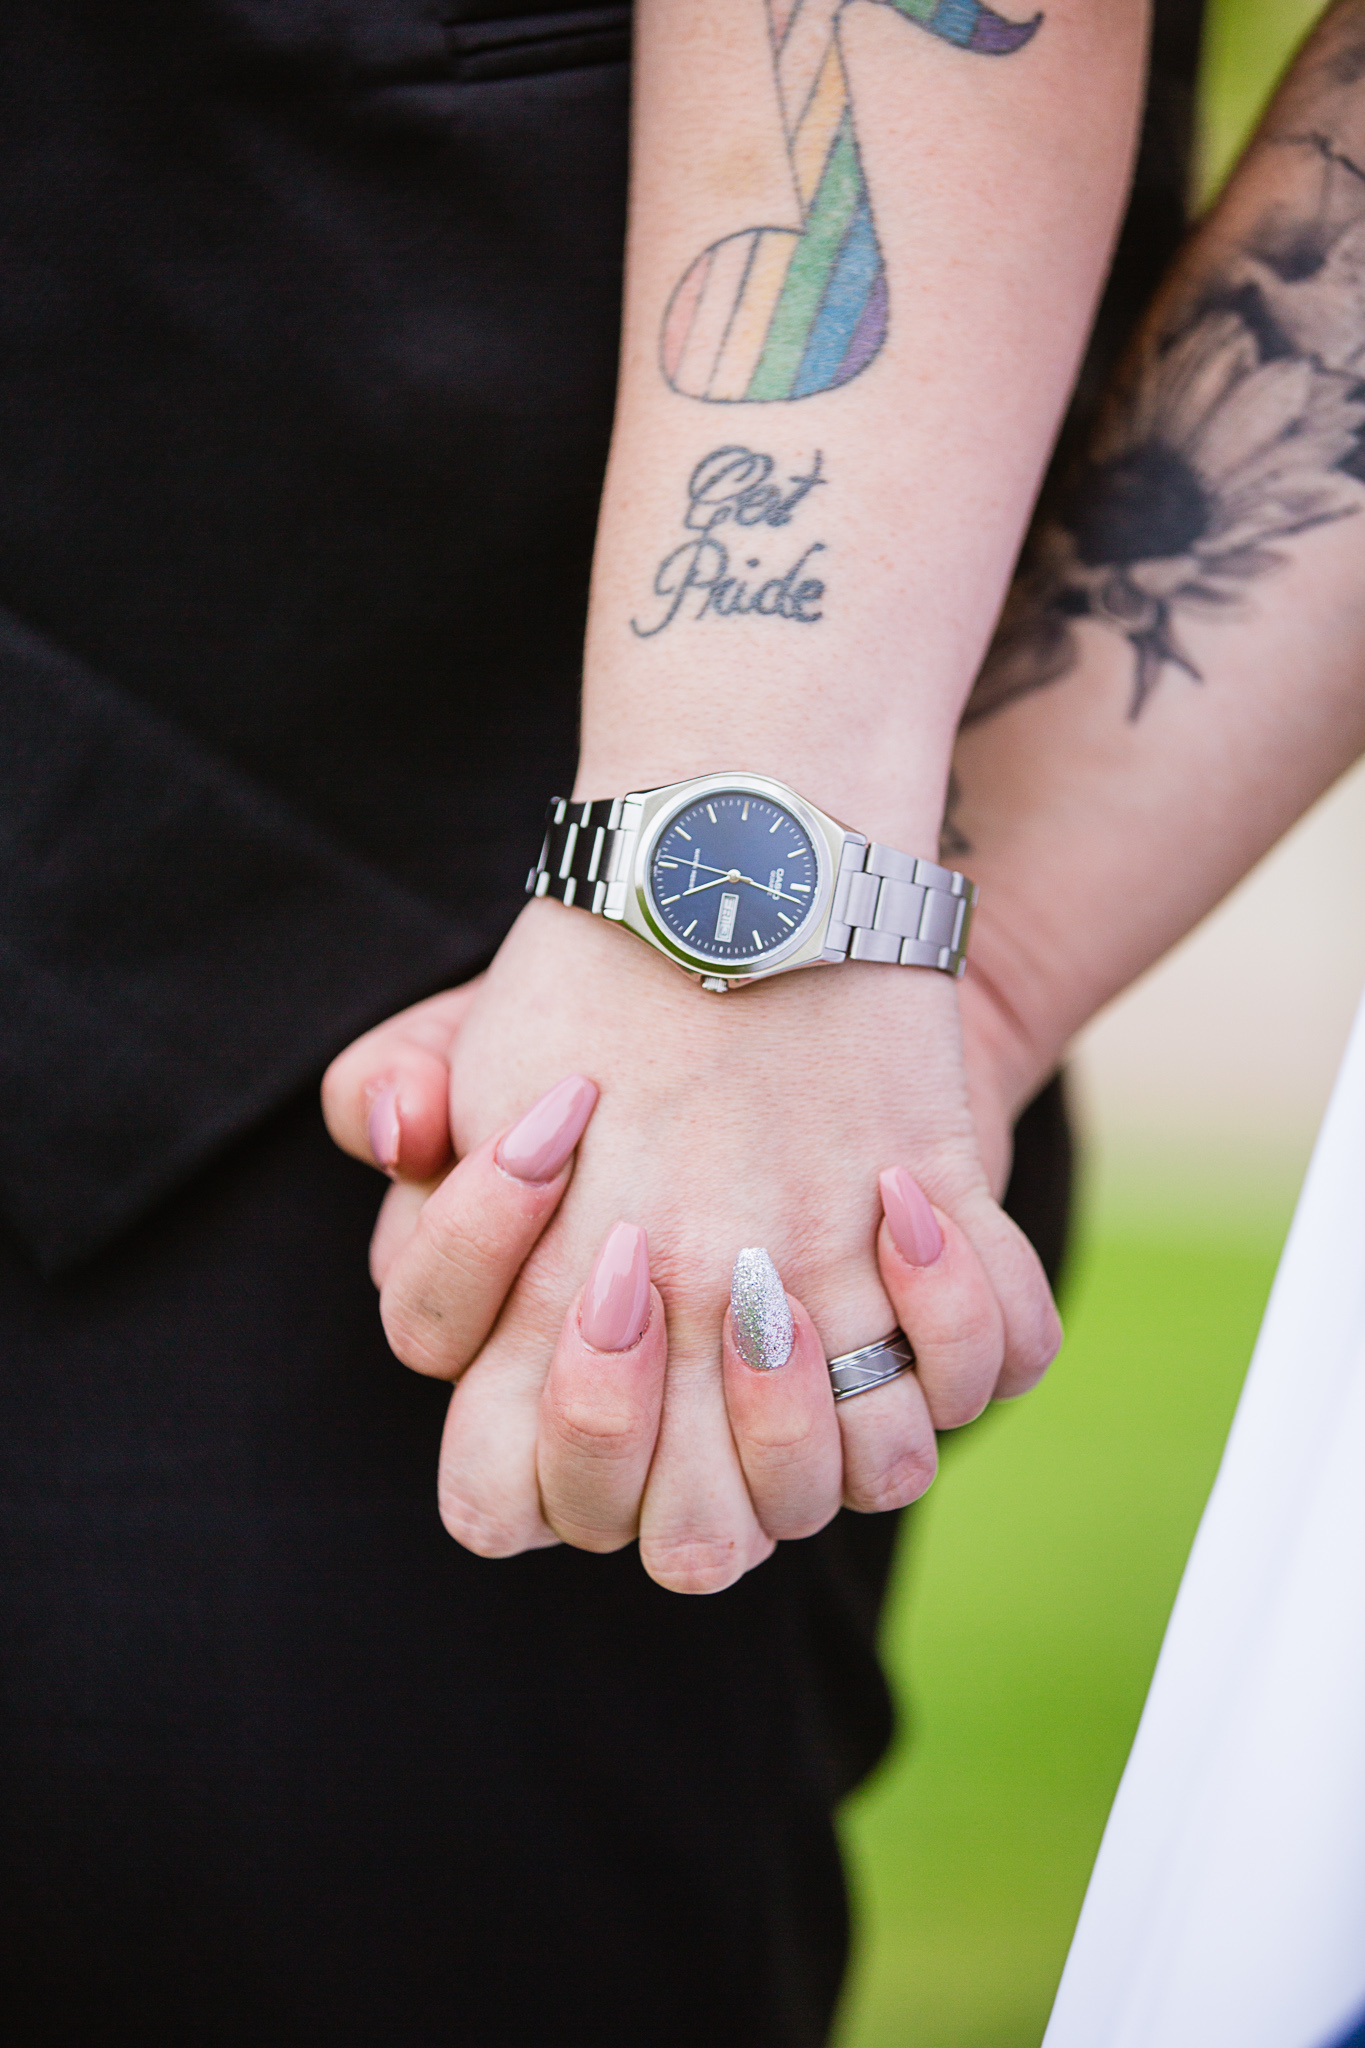 Close up image of LGBT couple holding hands showing 'got pride'tattoo by wedding photographer PMA Photography.